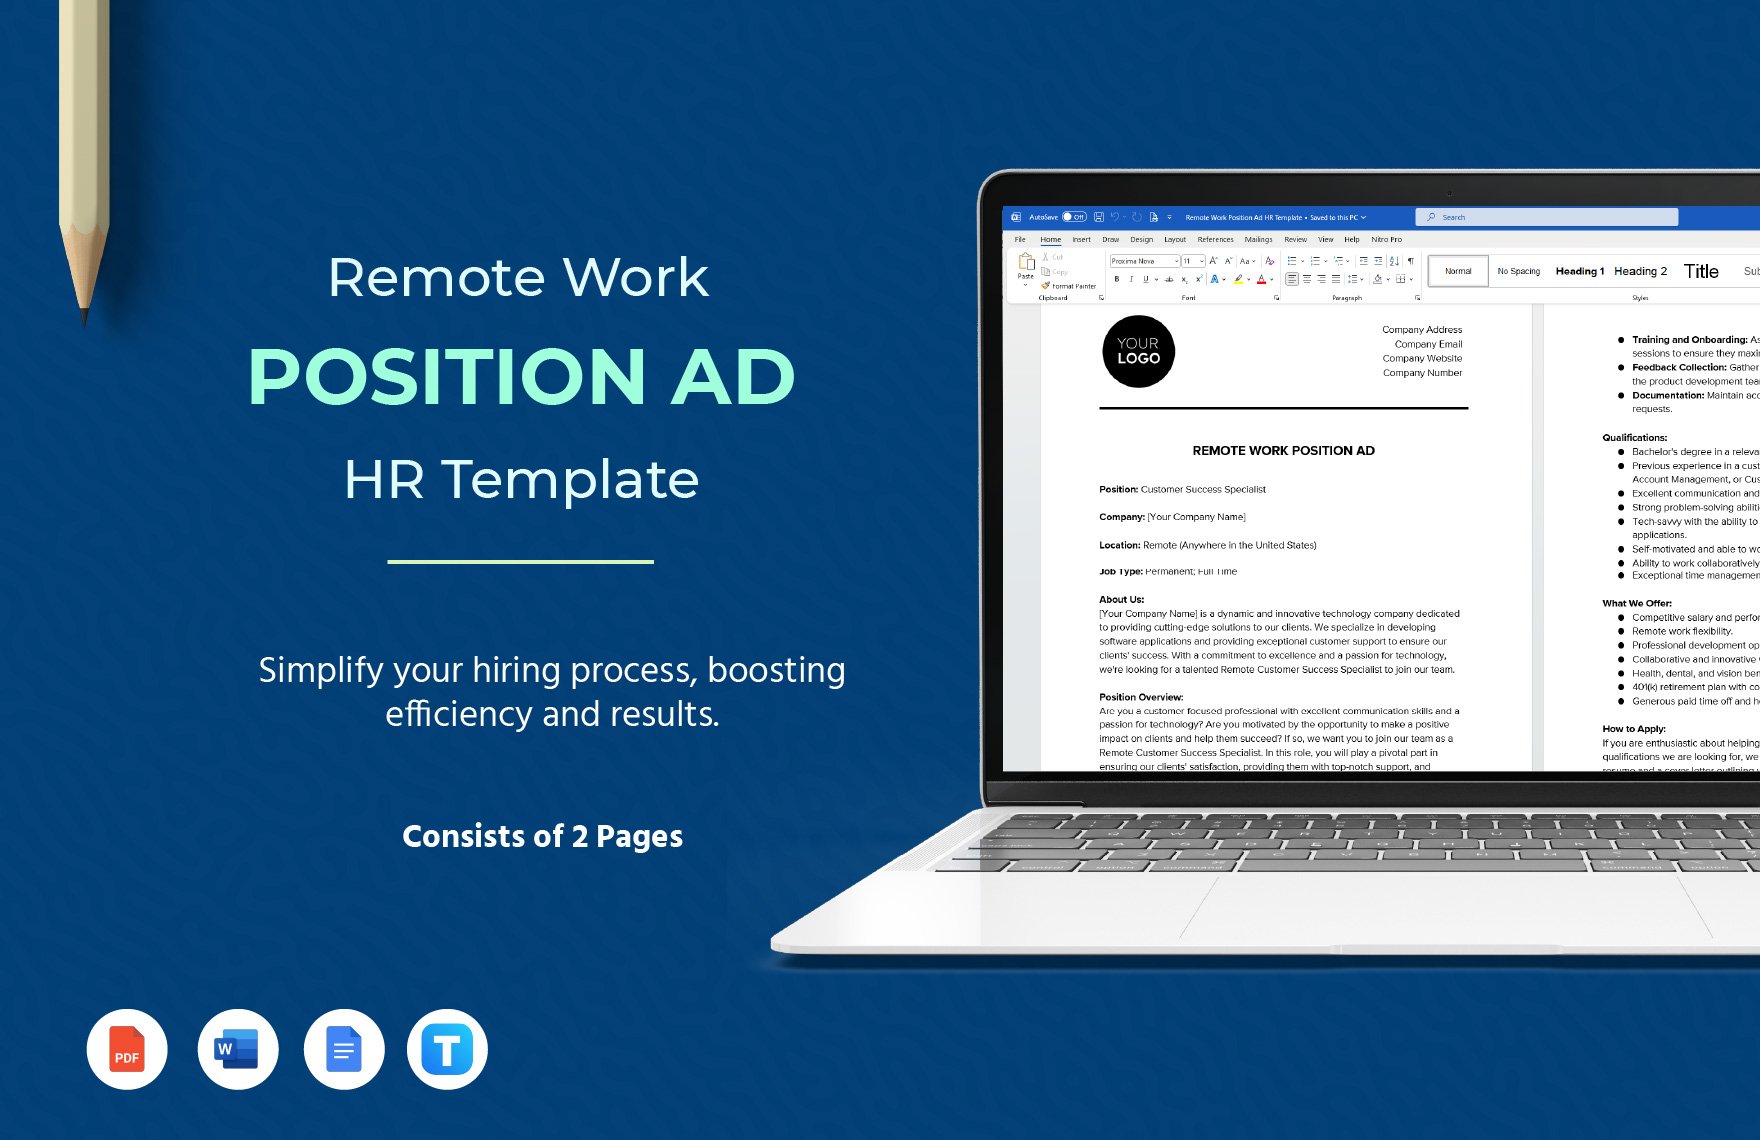 Remote Work Position Ad HR Template in Word, Google Docs, PDF